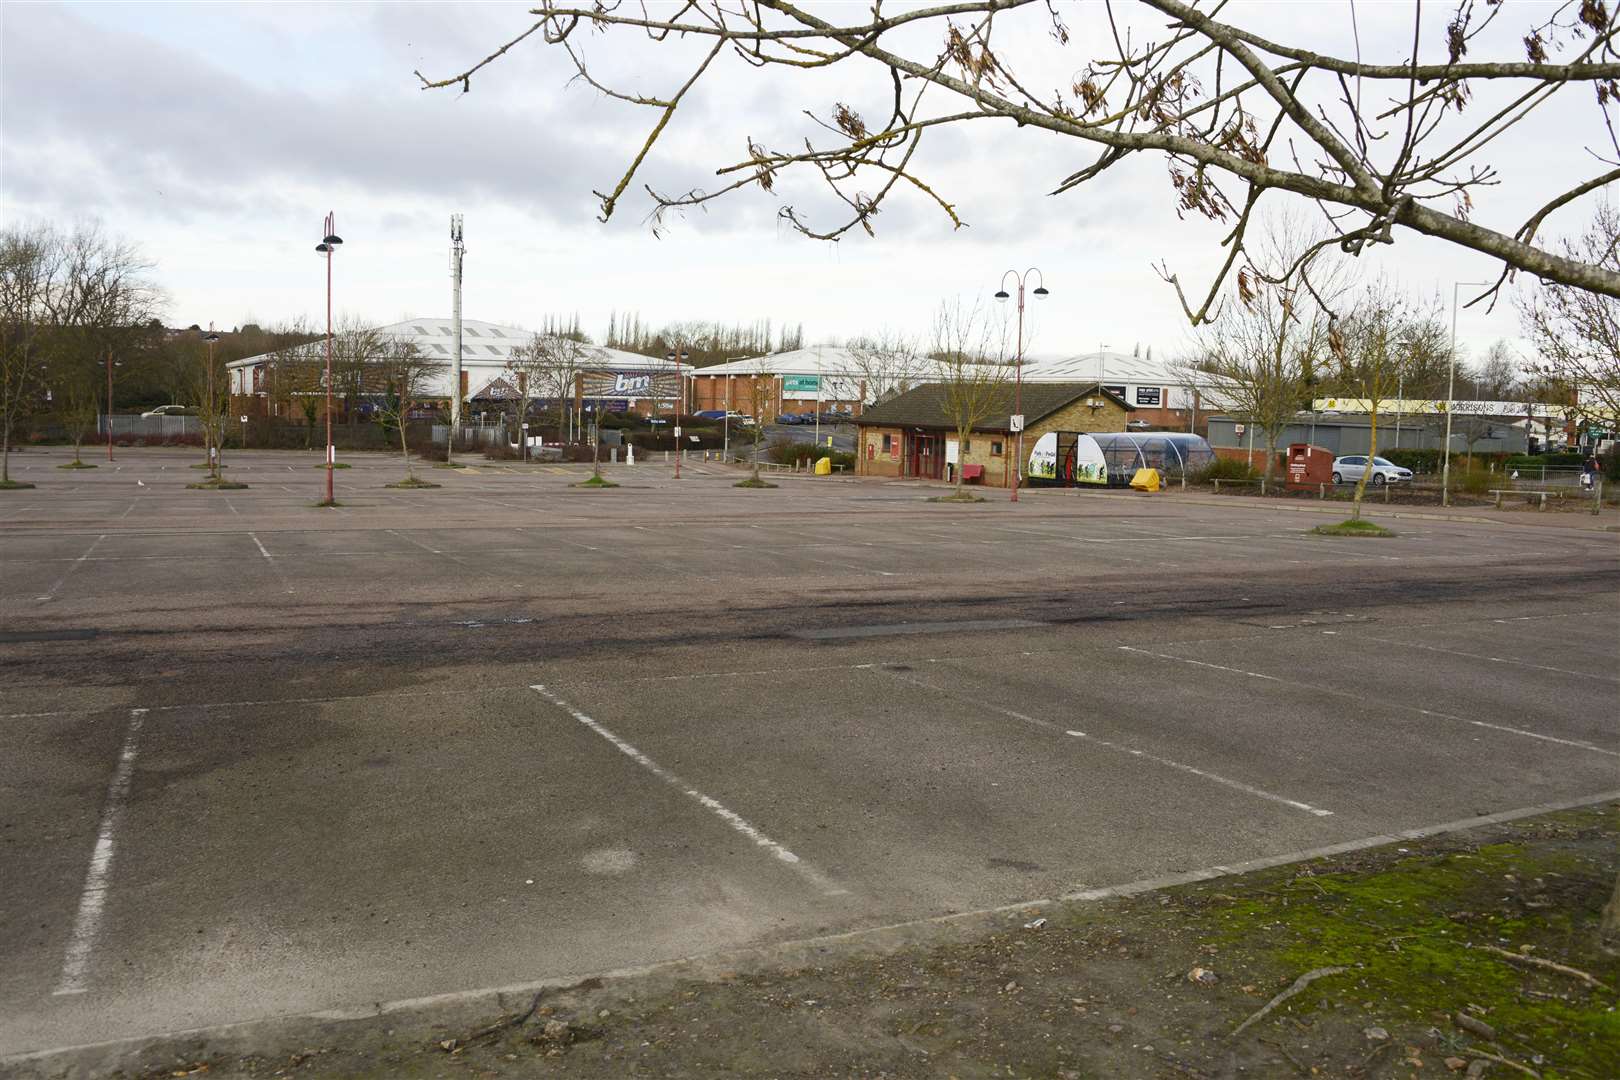 The current Wincheap park and ride site